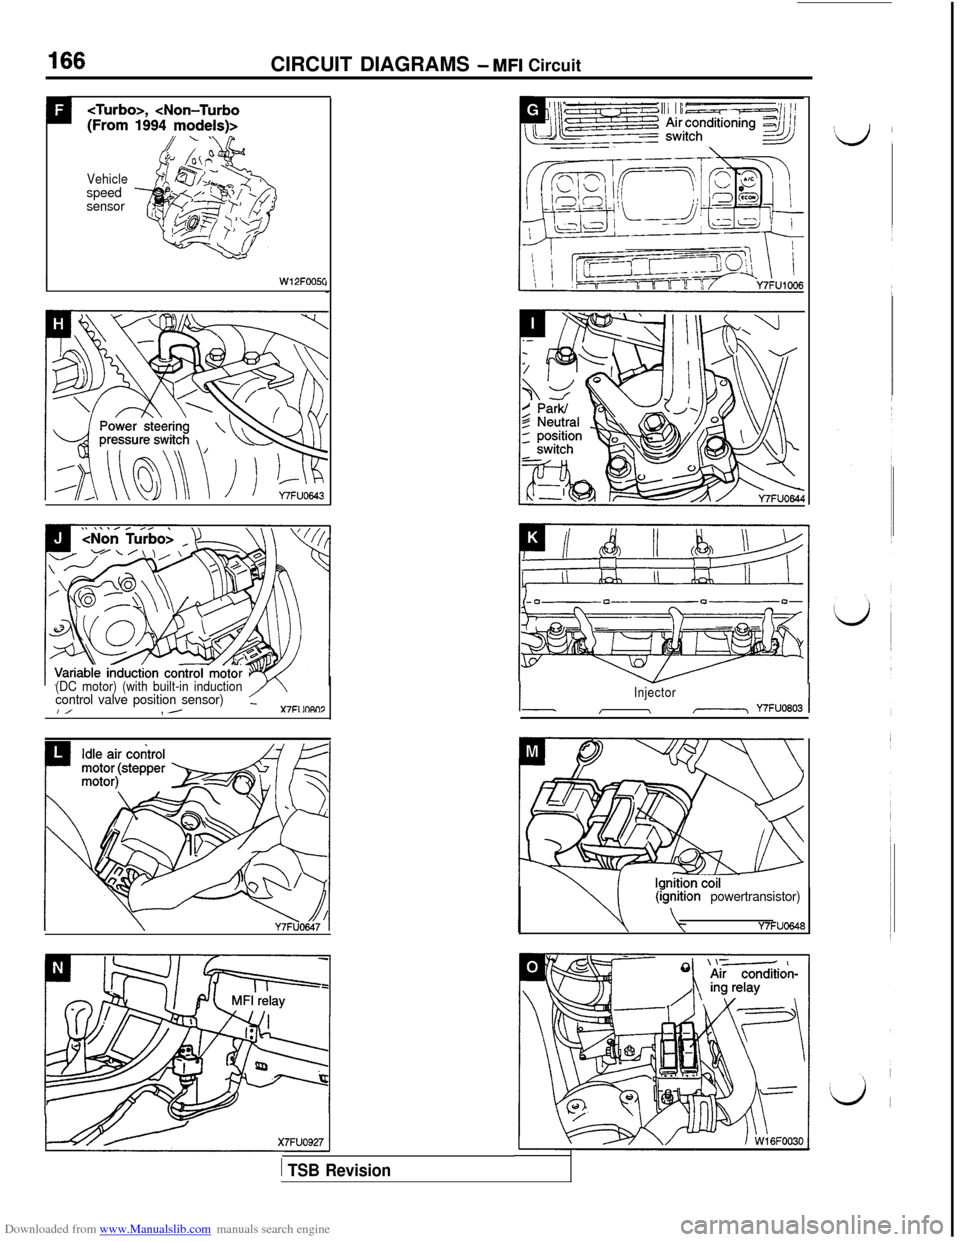 MITSUBISHI 3000GT 1992 2.G Workshop Manual Downloaded from www.Manualslib.com manuals search engine CIRCUIT DIAGRAMS - MFI Circuit
<Turbo>, <Non-Turbo(From 1994 models)>
Vehiclespeed
sensor
IW12FOOSC
(DC motor) (with built-in inductioncontrol 